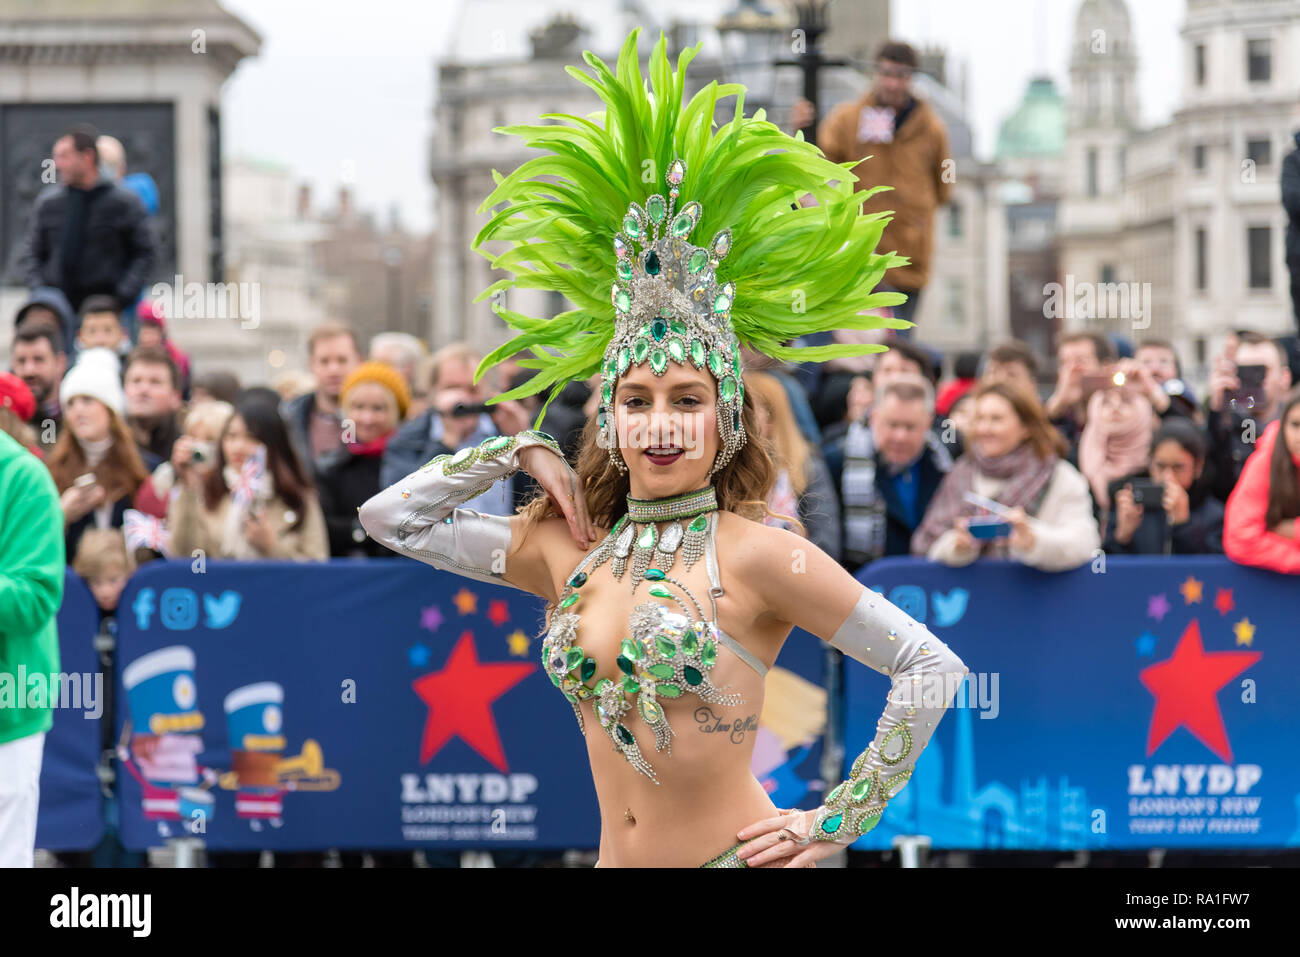 London, UK.  30 December 2018  Some of London New Year Day Parade’s best performers kick-starting festivities in front of the World famous National Gallery, Trafalgar Square, London, UK. Acts include The London School of Samba, which have been helping people to experience Brazilian Carnival culture since 1984.  Credit: Ilyas Ayub / Alamy Live News Stock Photo